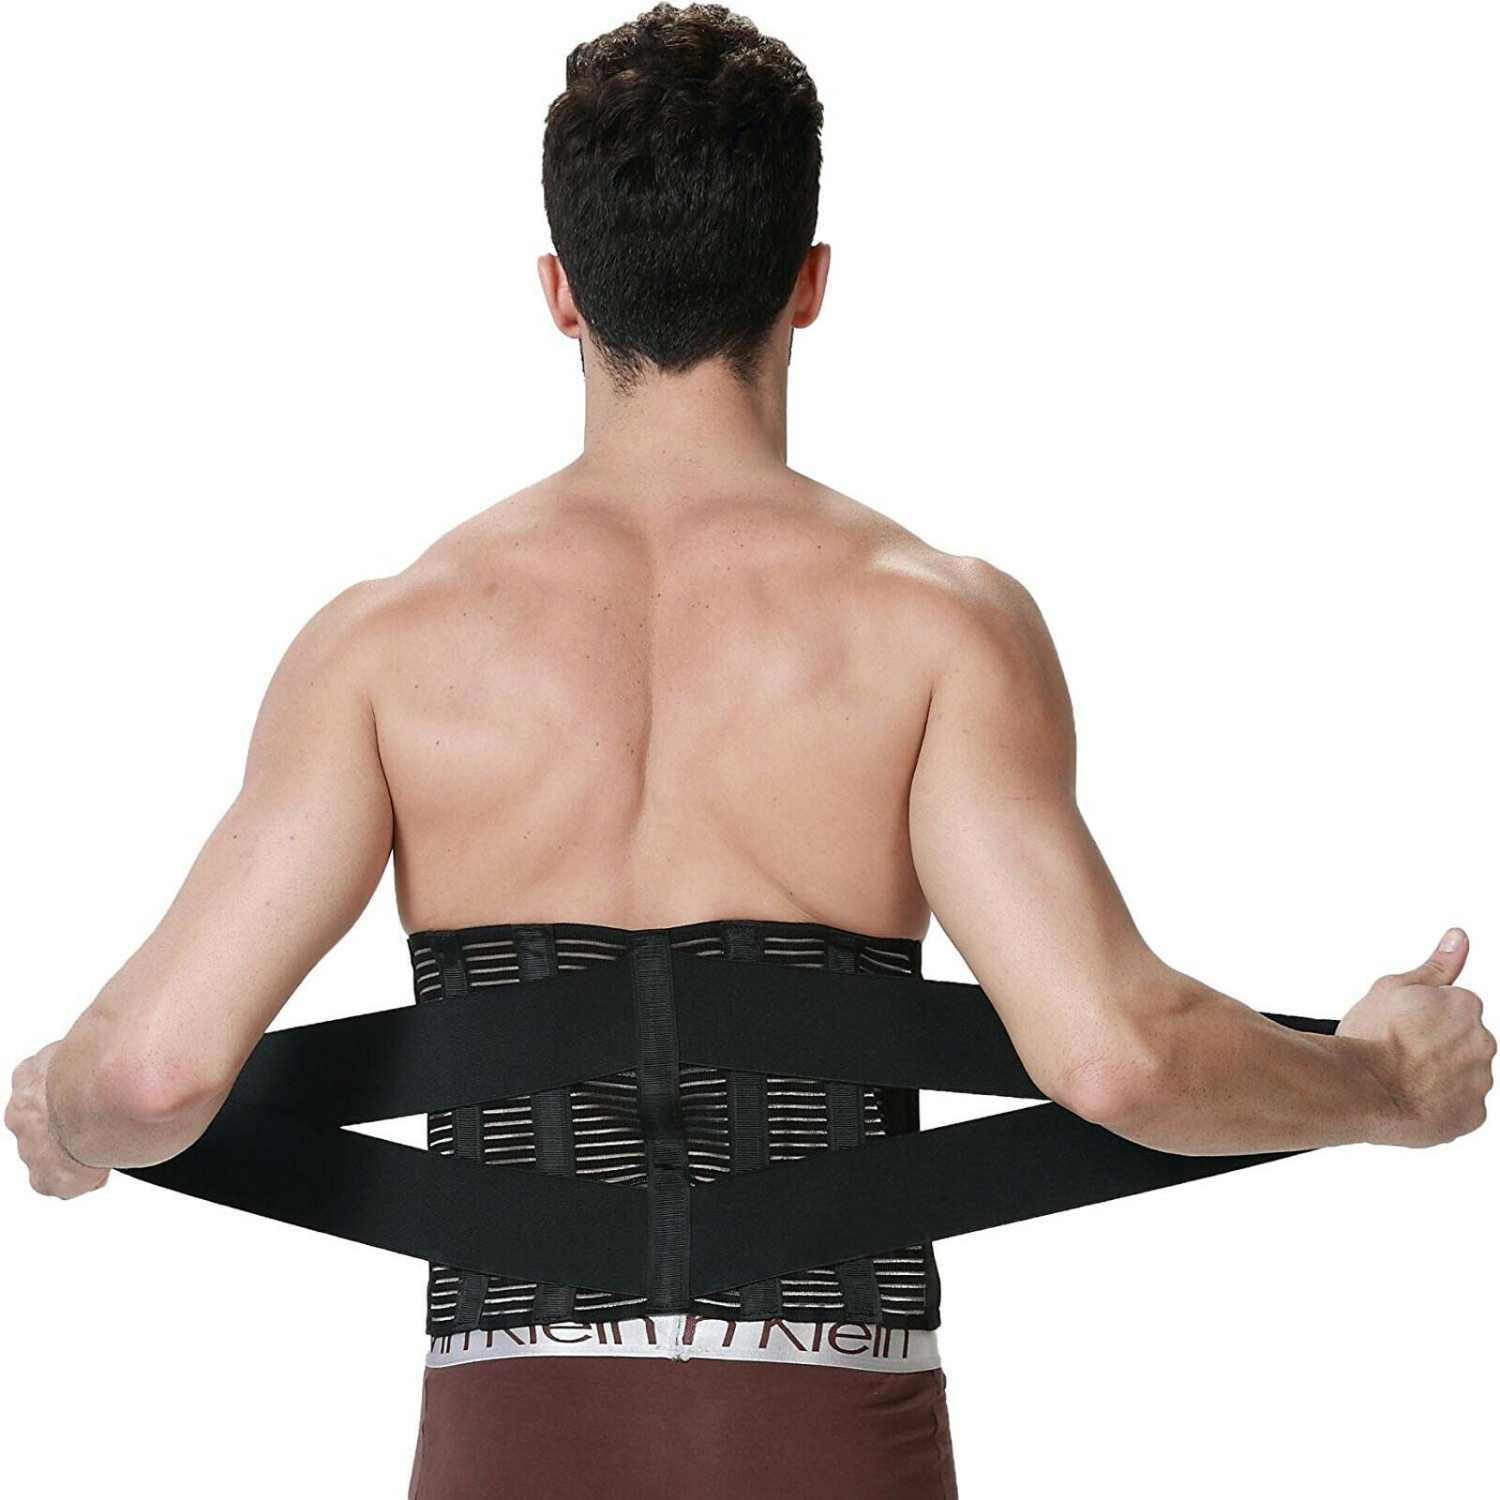 Adjustable Back Braces for Lower Back Pain Relief for Gym,Posture